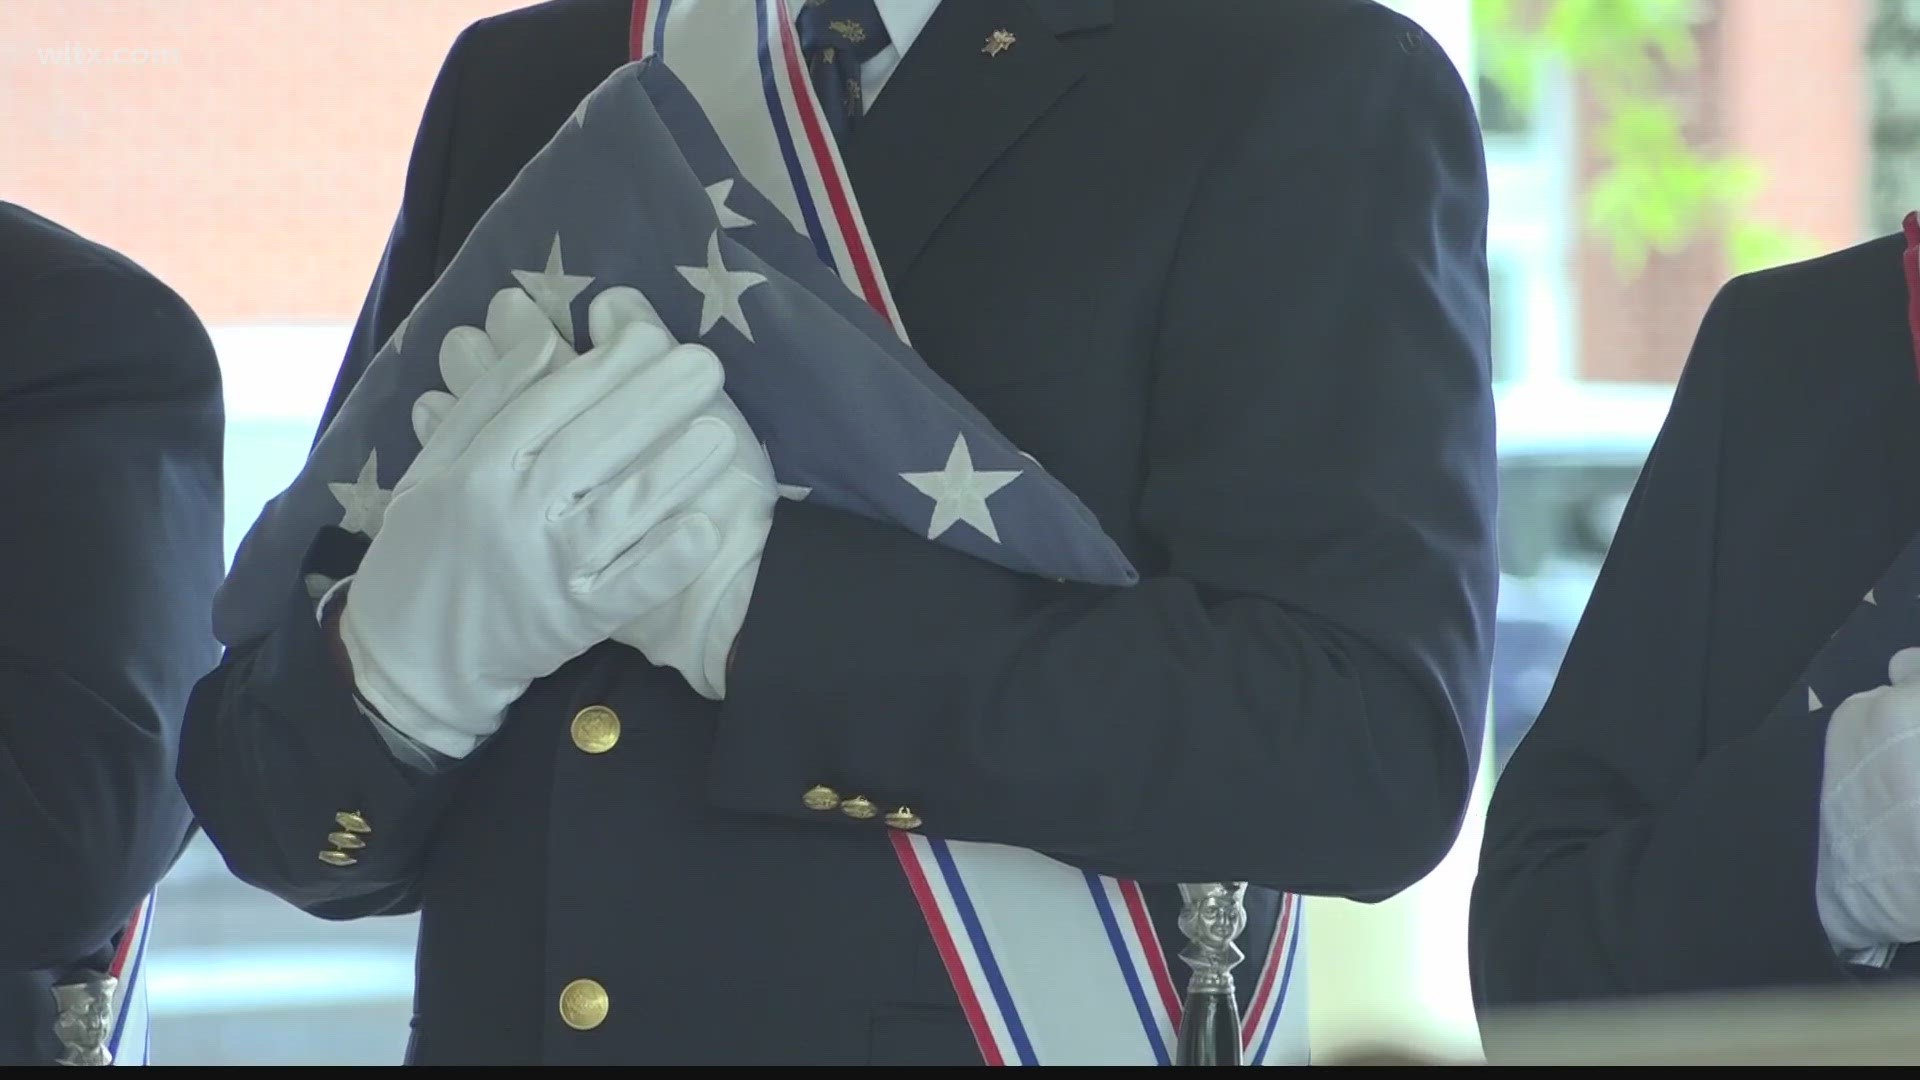 One local group held a flag retirement ceremony as a way to properly dispose of a flag.